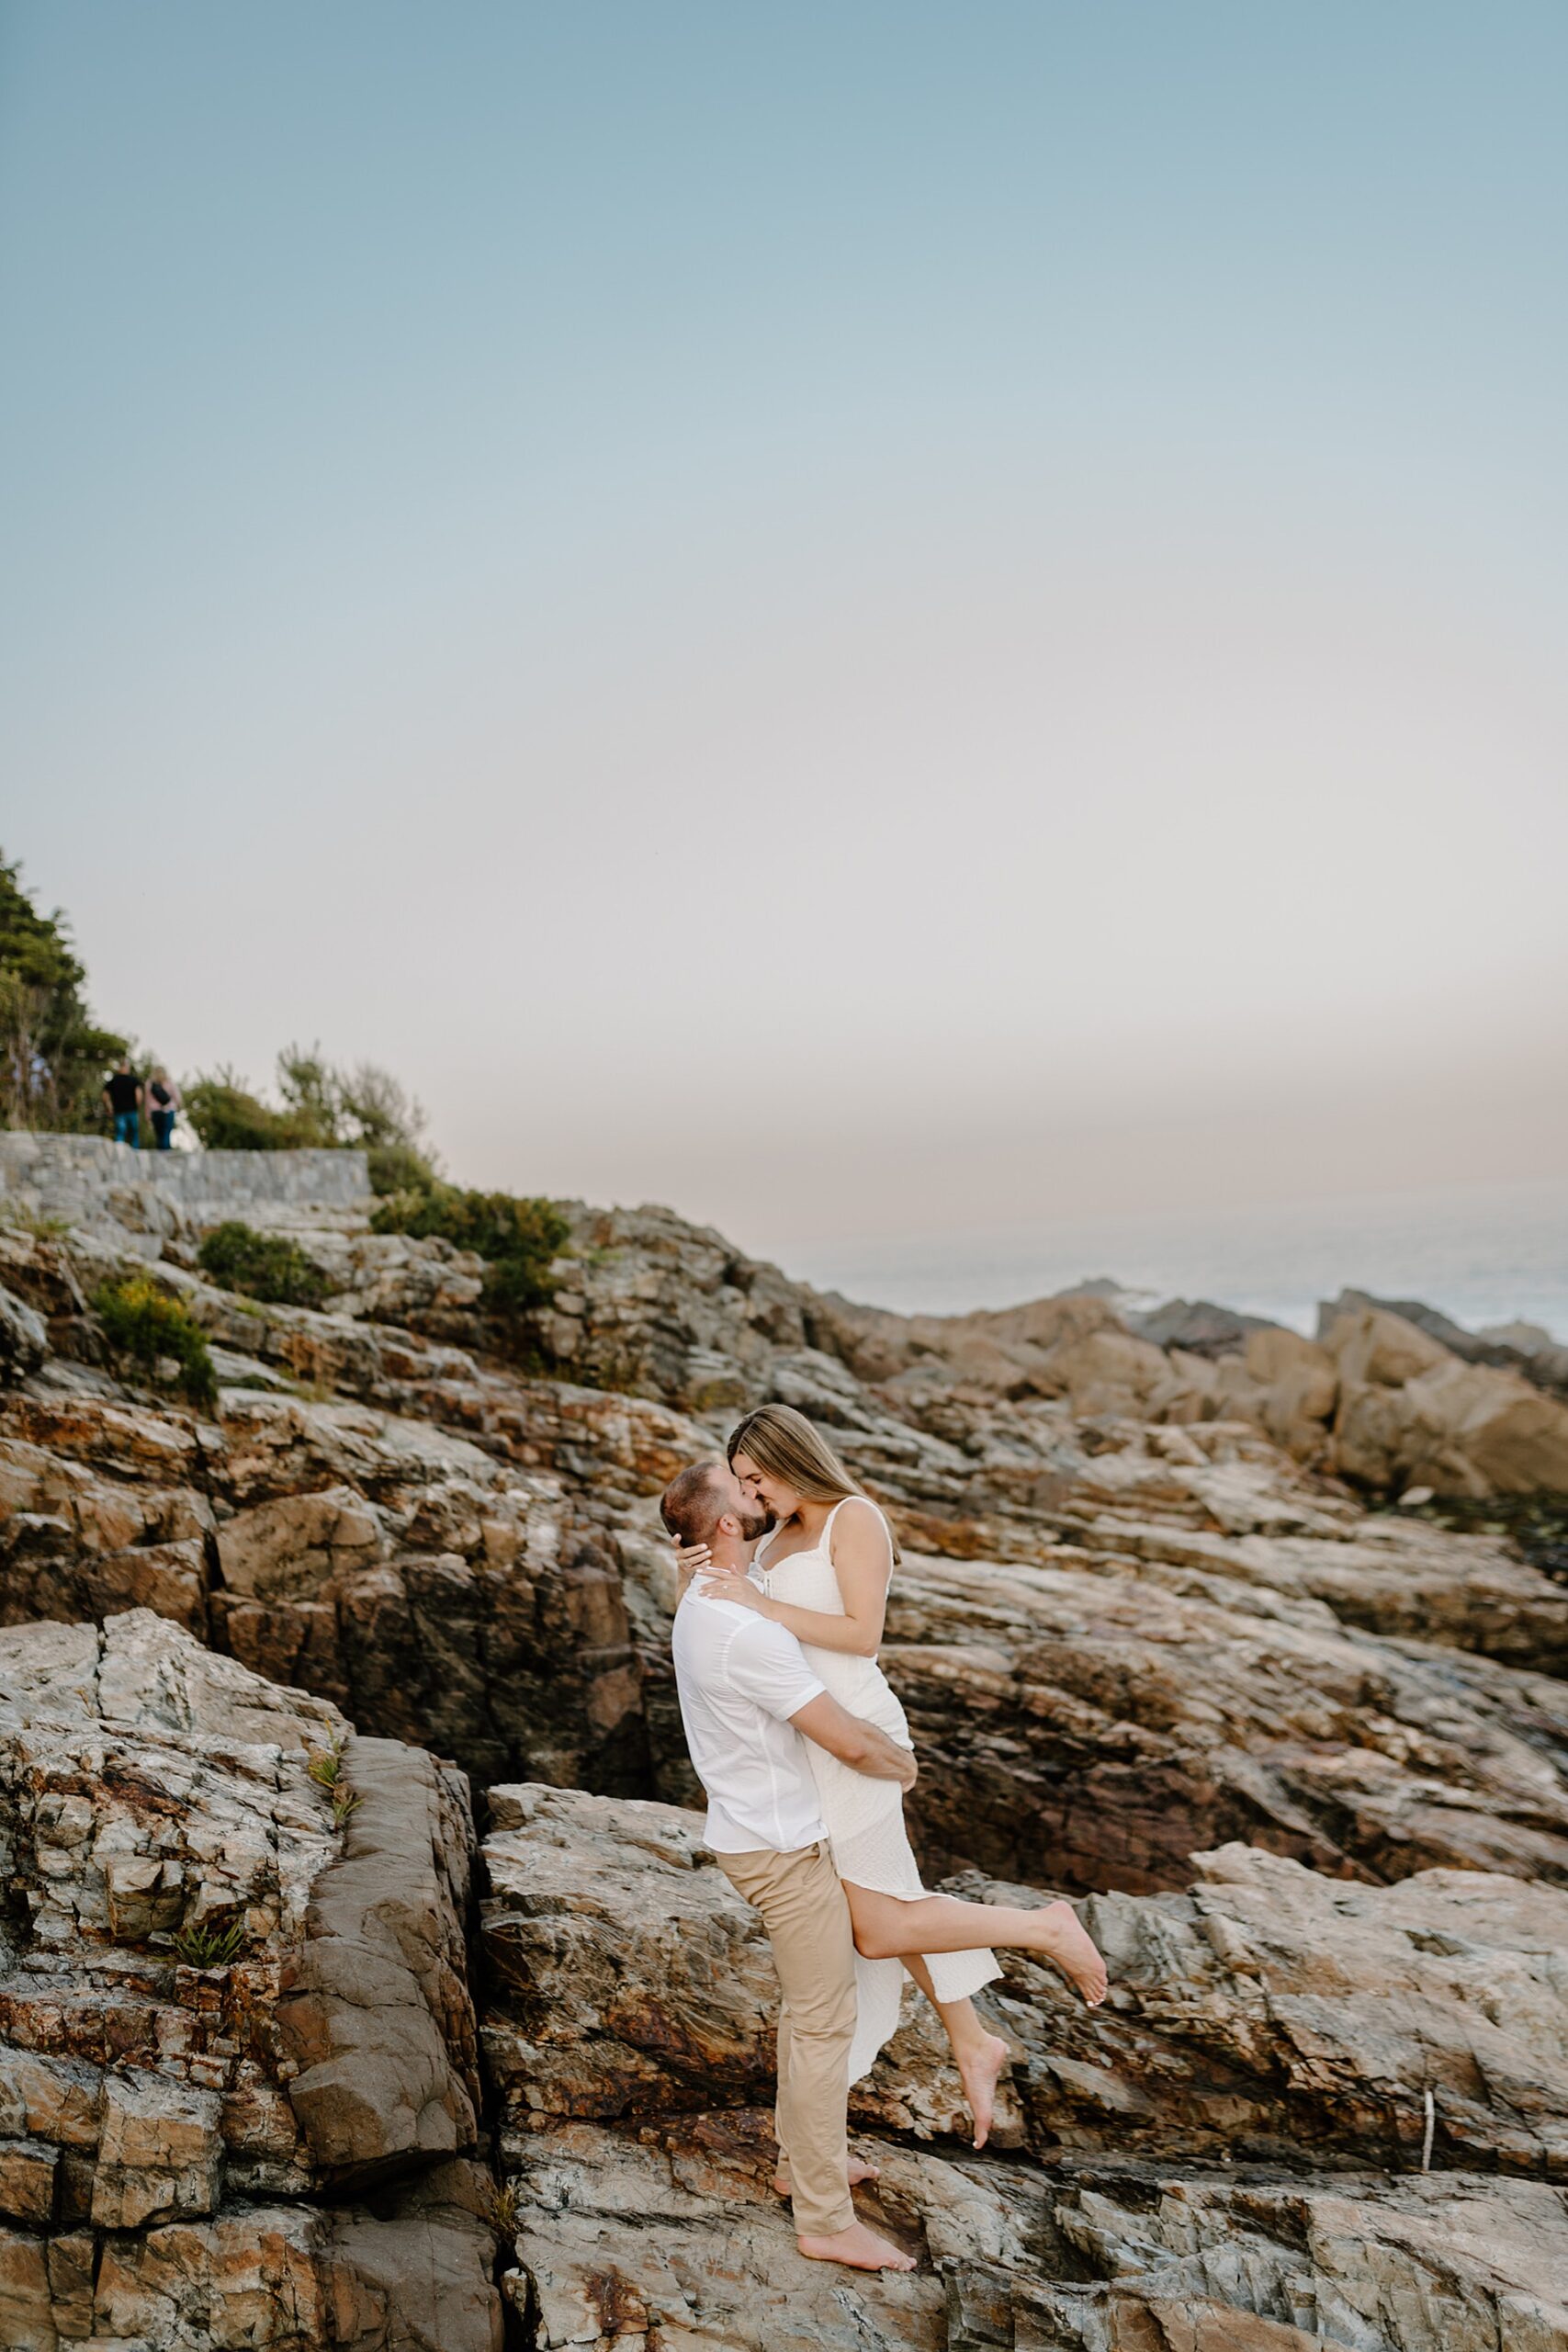 Tips to prepare for your engagement session